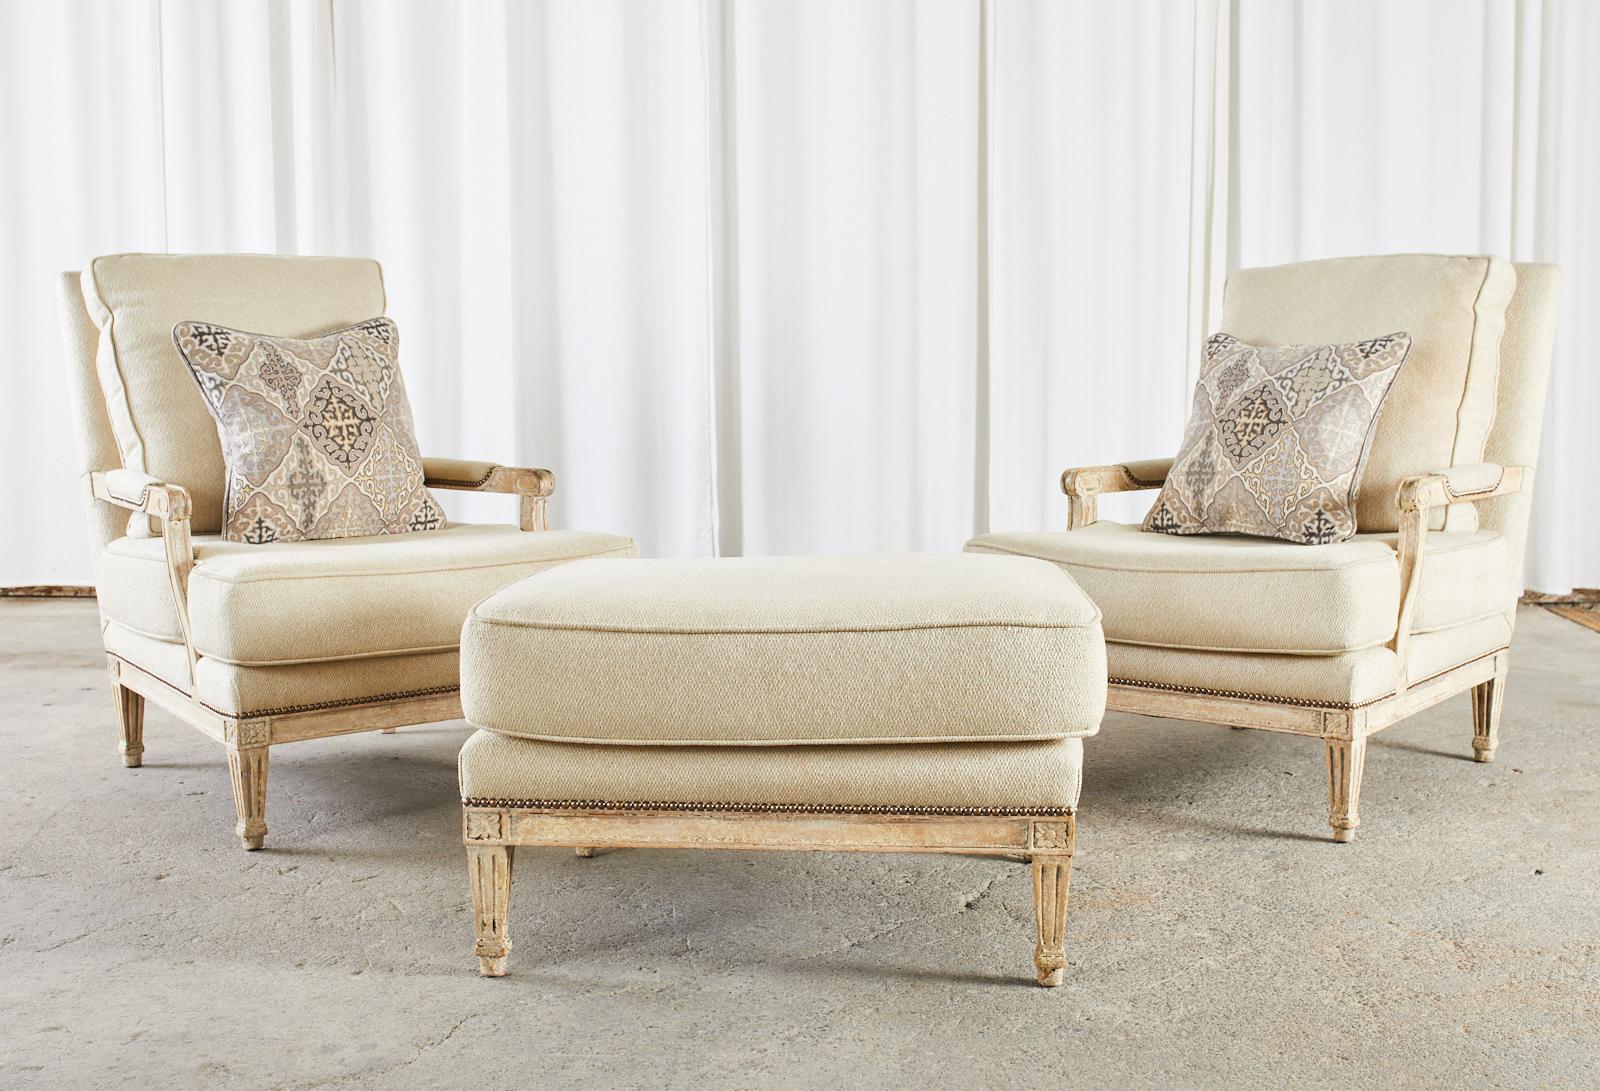 Amazing pair of French Louis XVI style fauteuils, armchairs, or lounge chairs with an ottoman. The large chairs are made in the fauteuil a la Reine style with classic square backs and generous seats. Crafted from beech frames with an intentionally